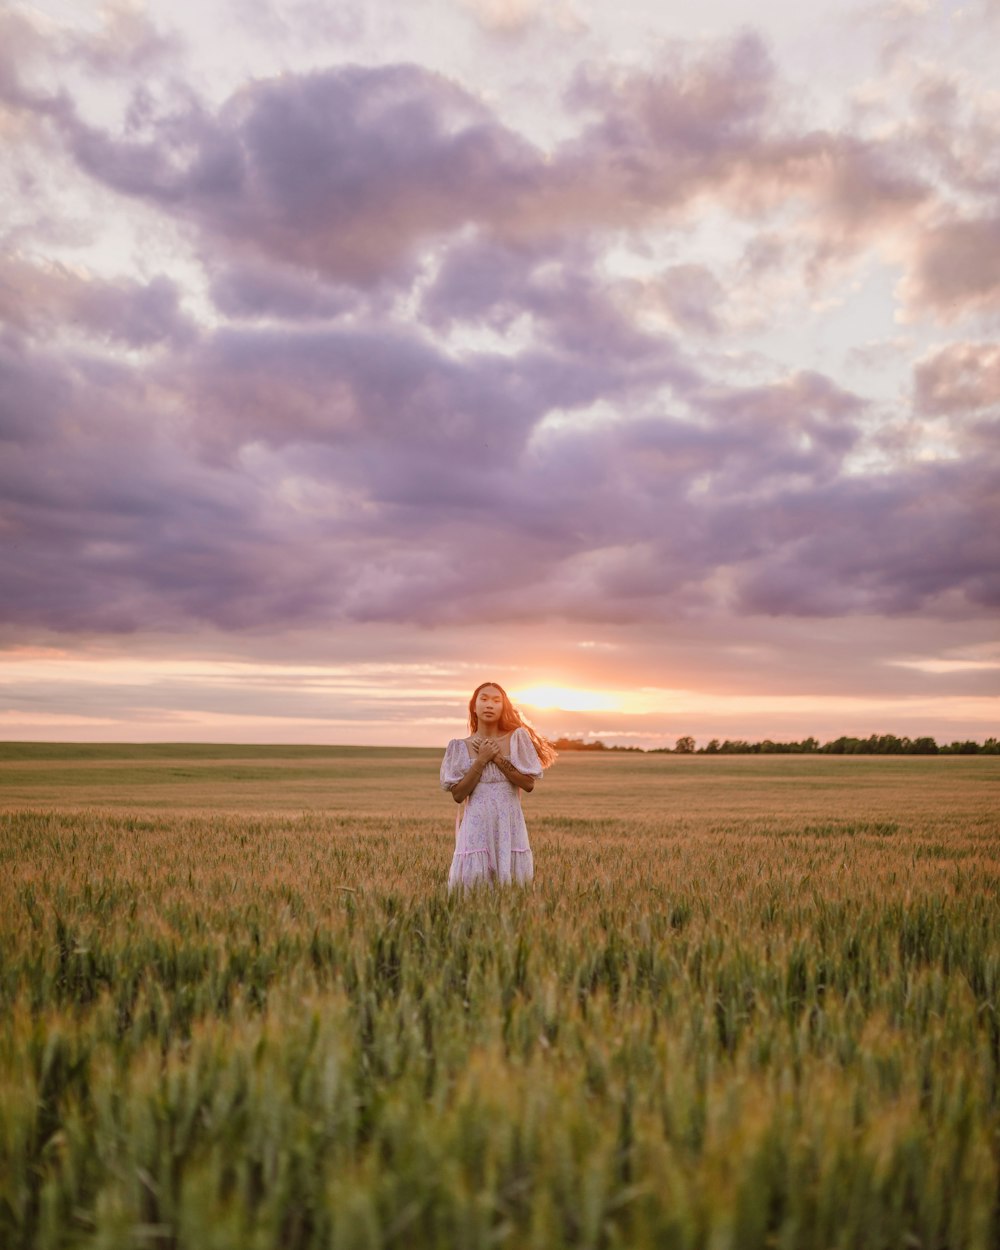 woman in white dress standing on green grass field under cloudy sky during daytime